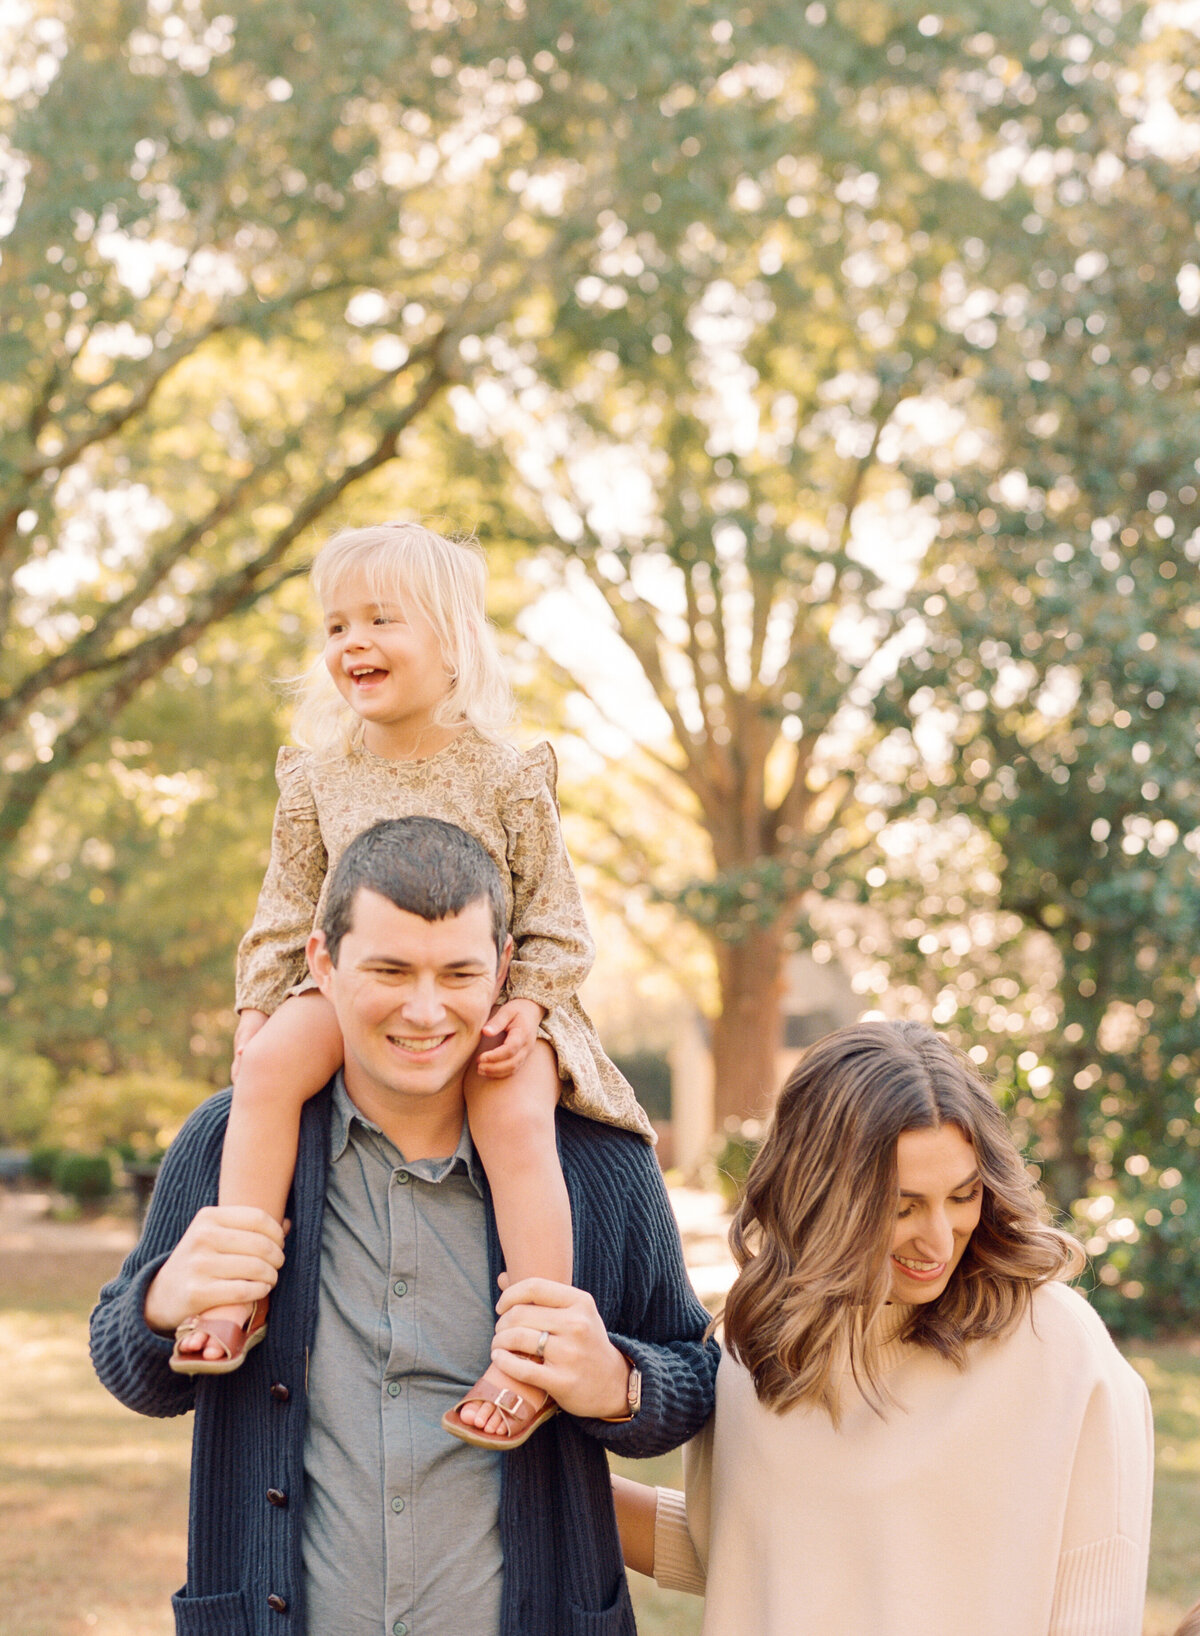 Toddler rides on her dad's shoulders during a fall family session in Raleigh. Family walking during their family portrait session in Wake Forest, NC. Photographed by Raleigh family photographer A.J. Dunlap Photography.